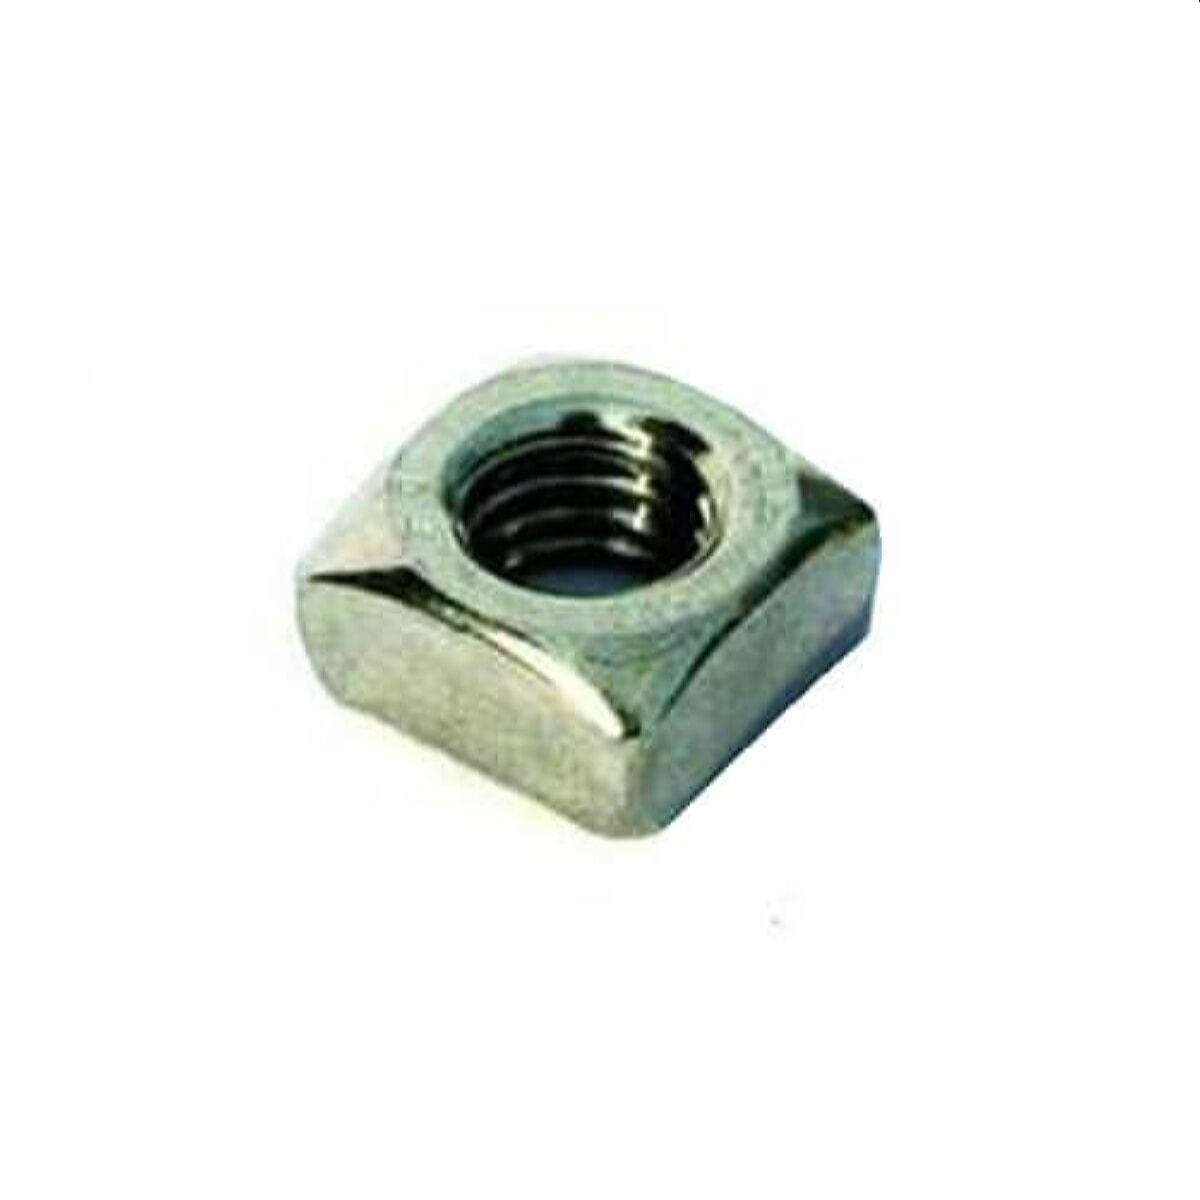 Schletter square nut M8 V4A for Schletter click-in module PU 100 pieces